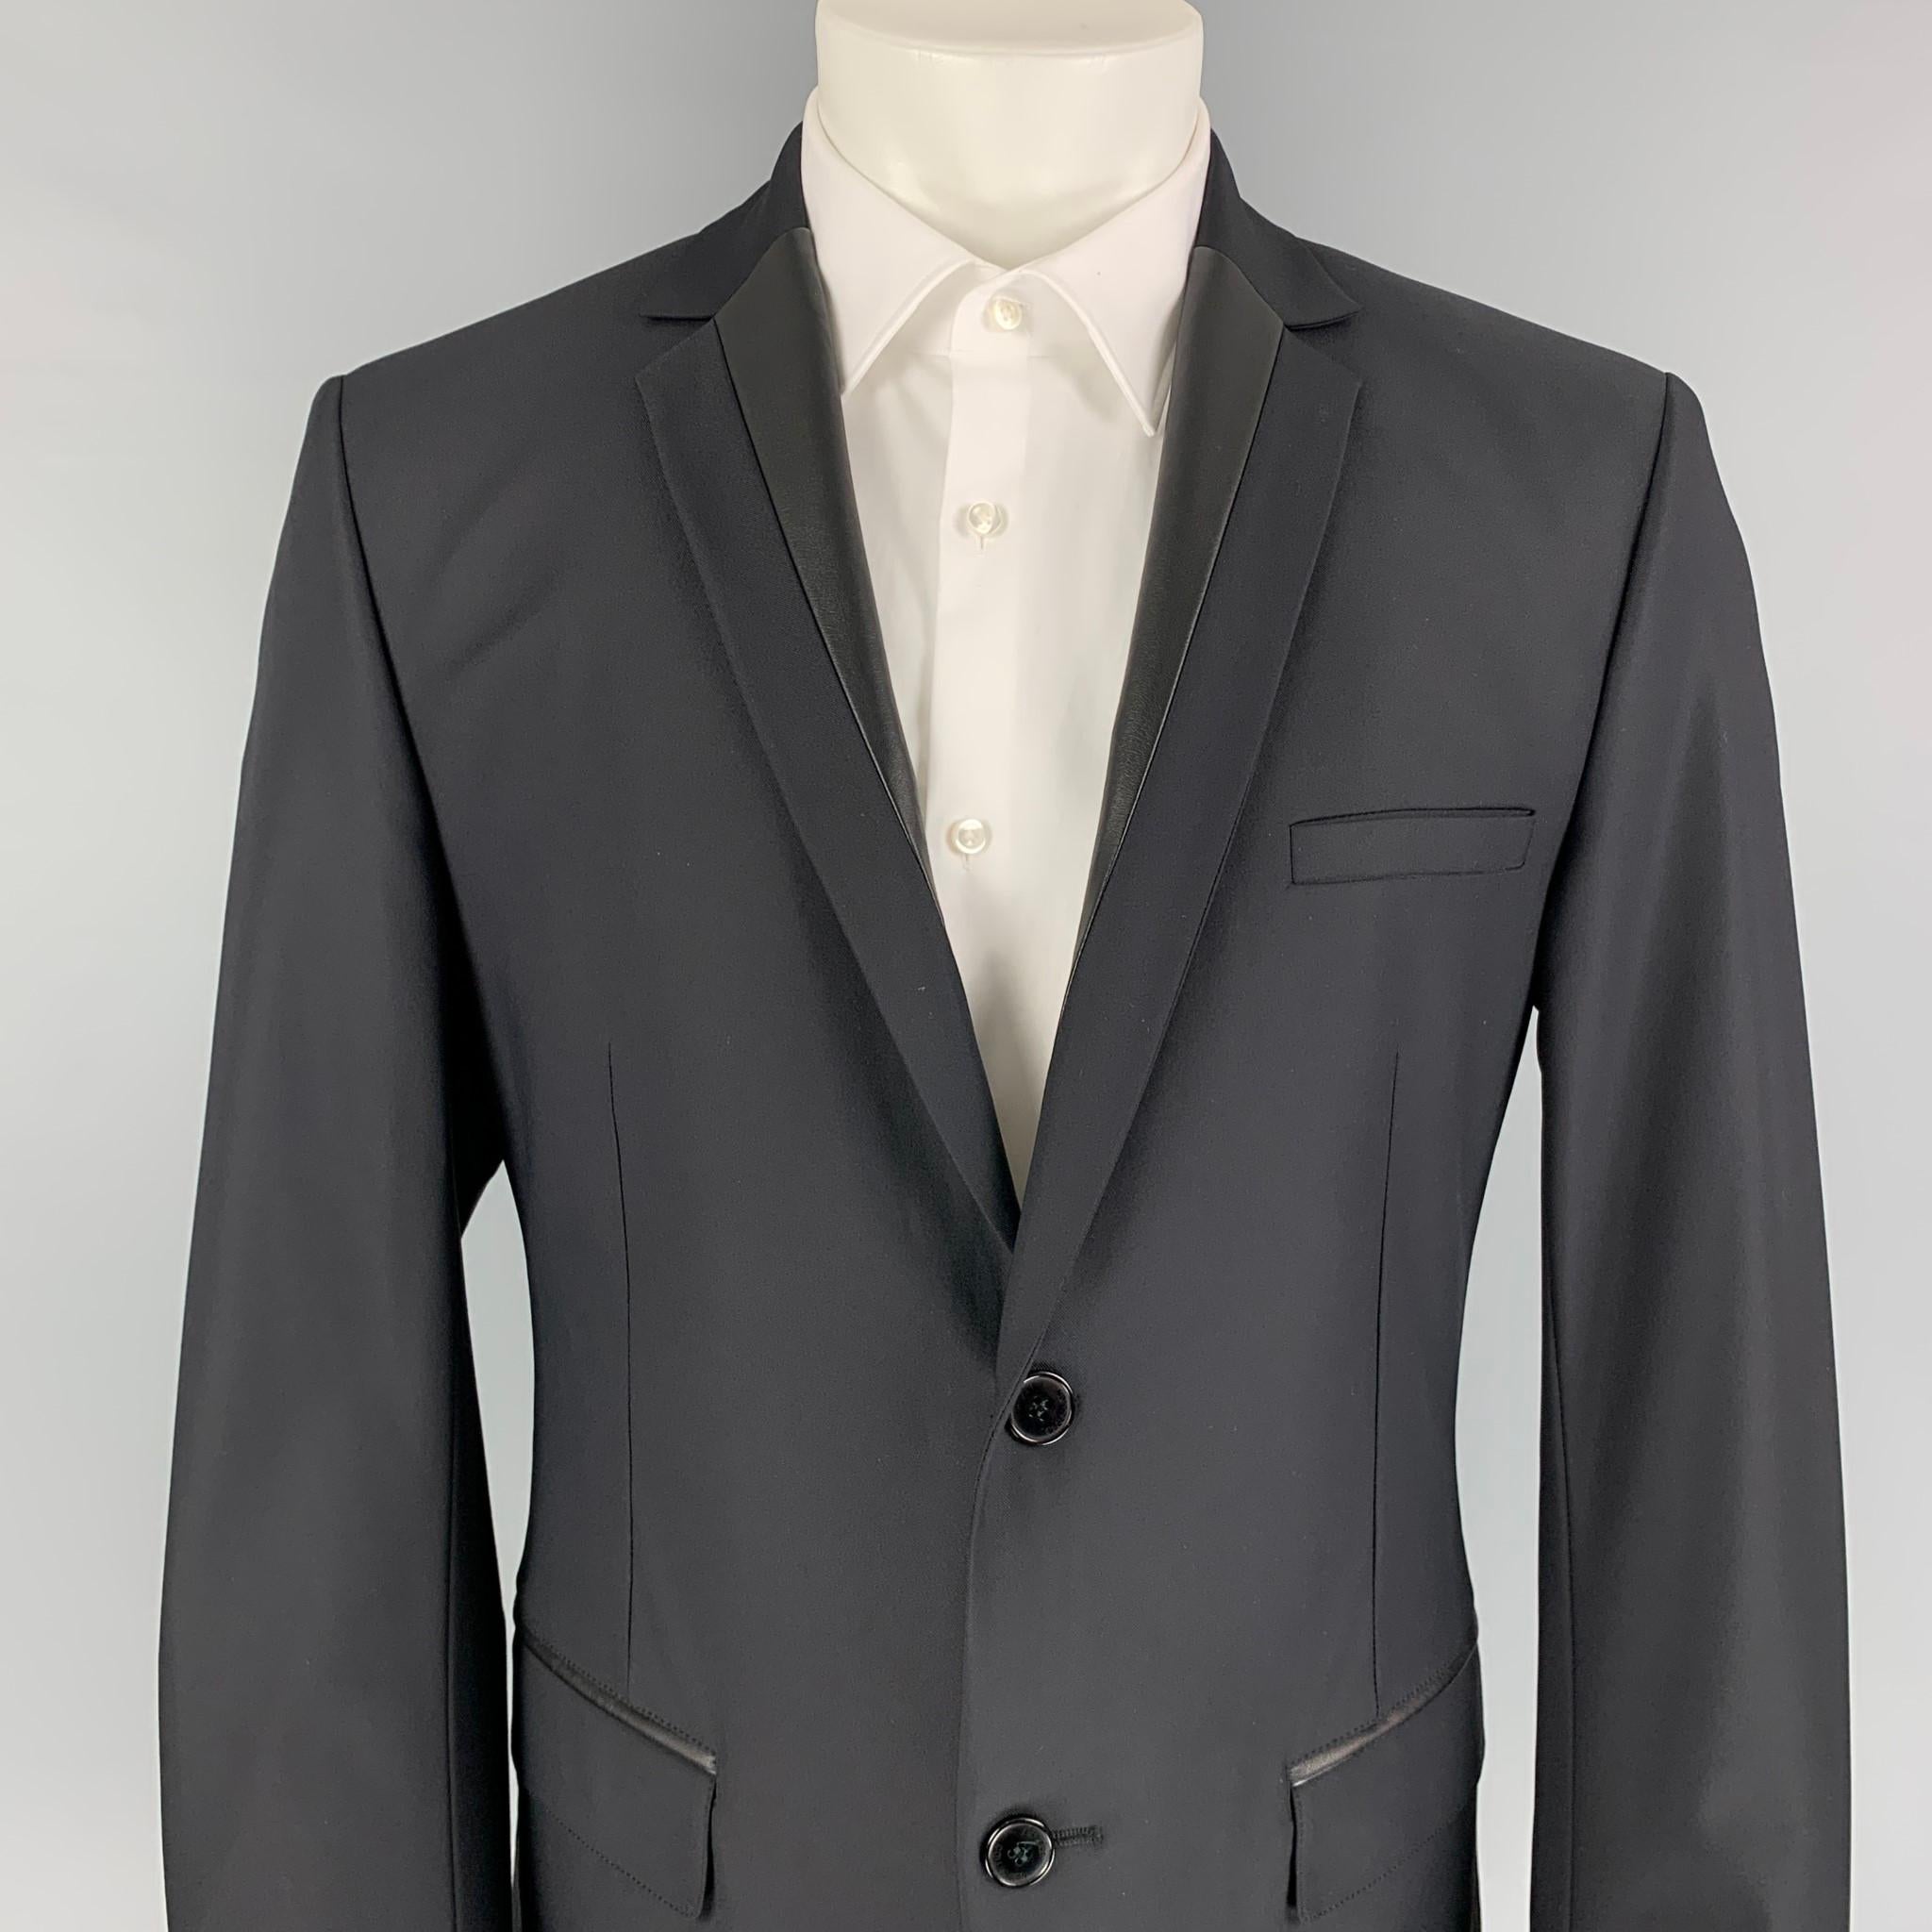 VERSACE COLLECTION sport coat comes in a black polyamide with a full liner featuring a notch lapel, leather trim, flap pockets, single back vent, and a double button closure. Made in Romani. 

Excellent Pre-Owned Condition.
Marked: